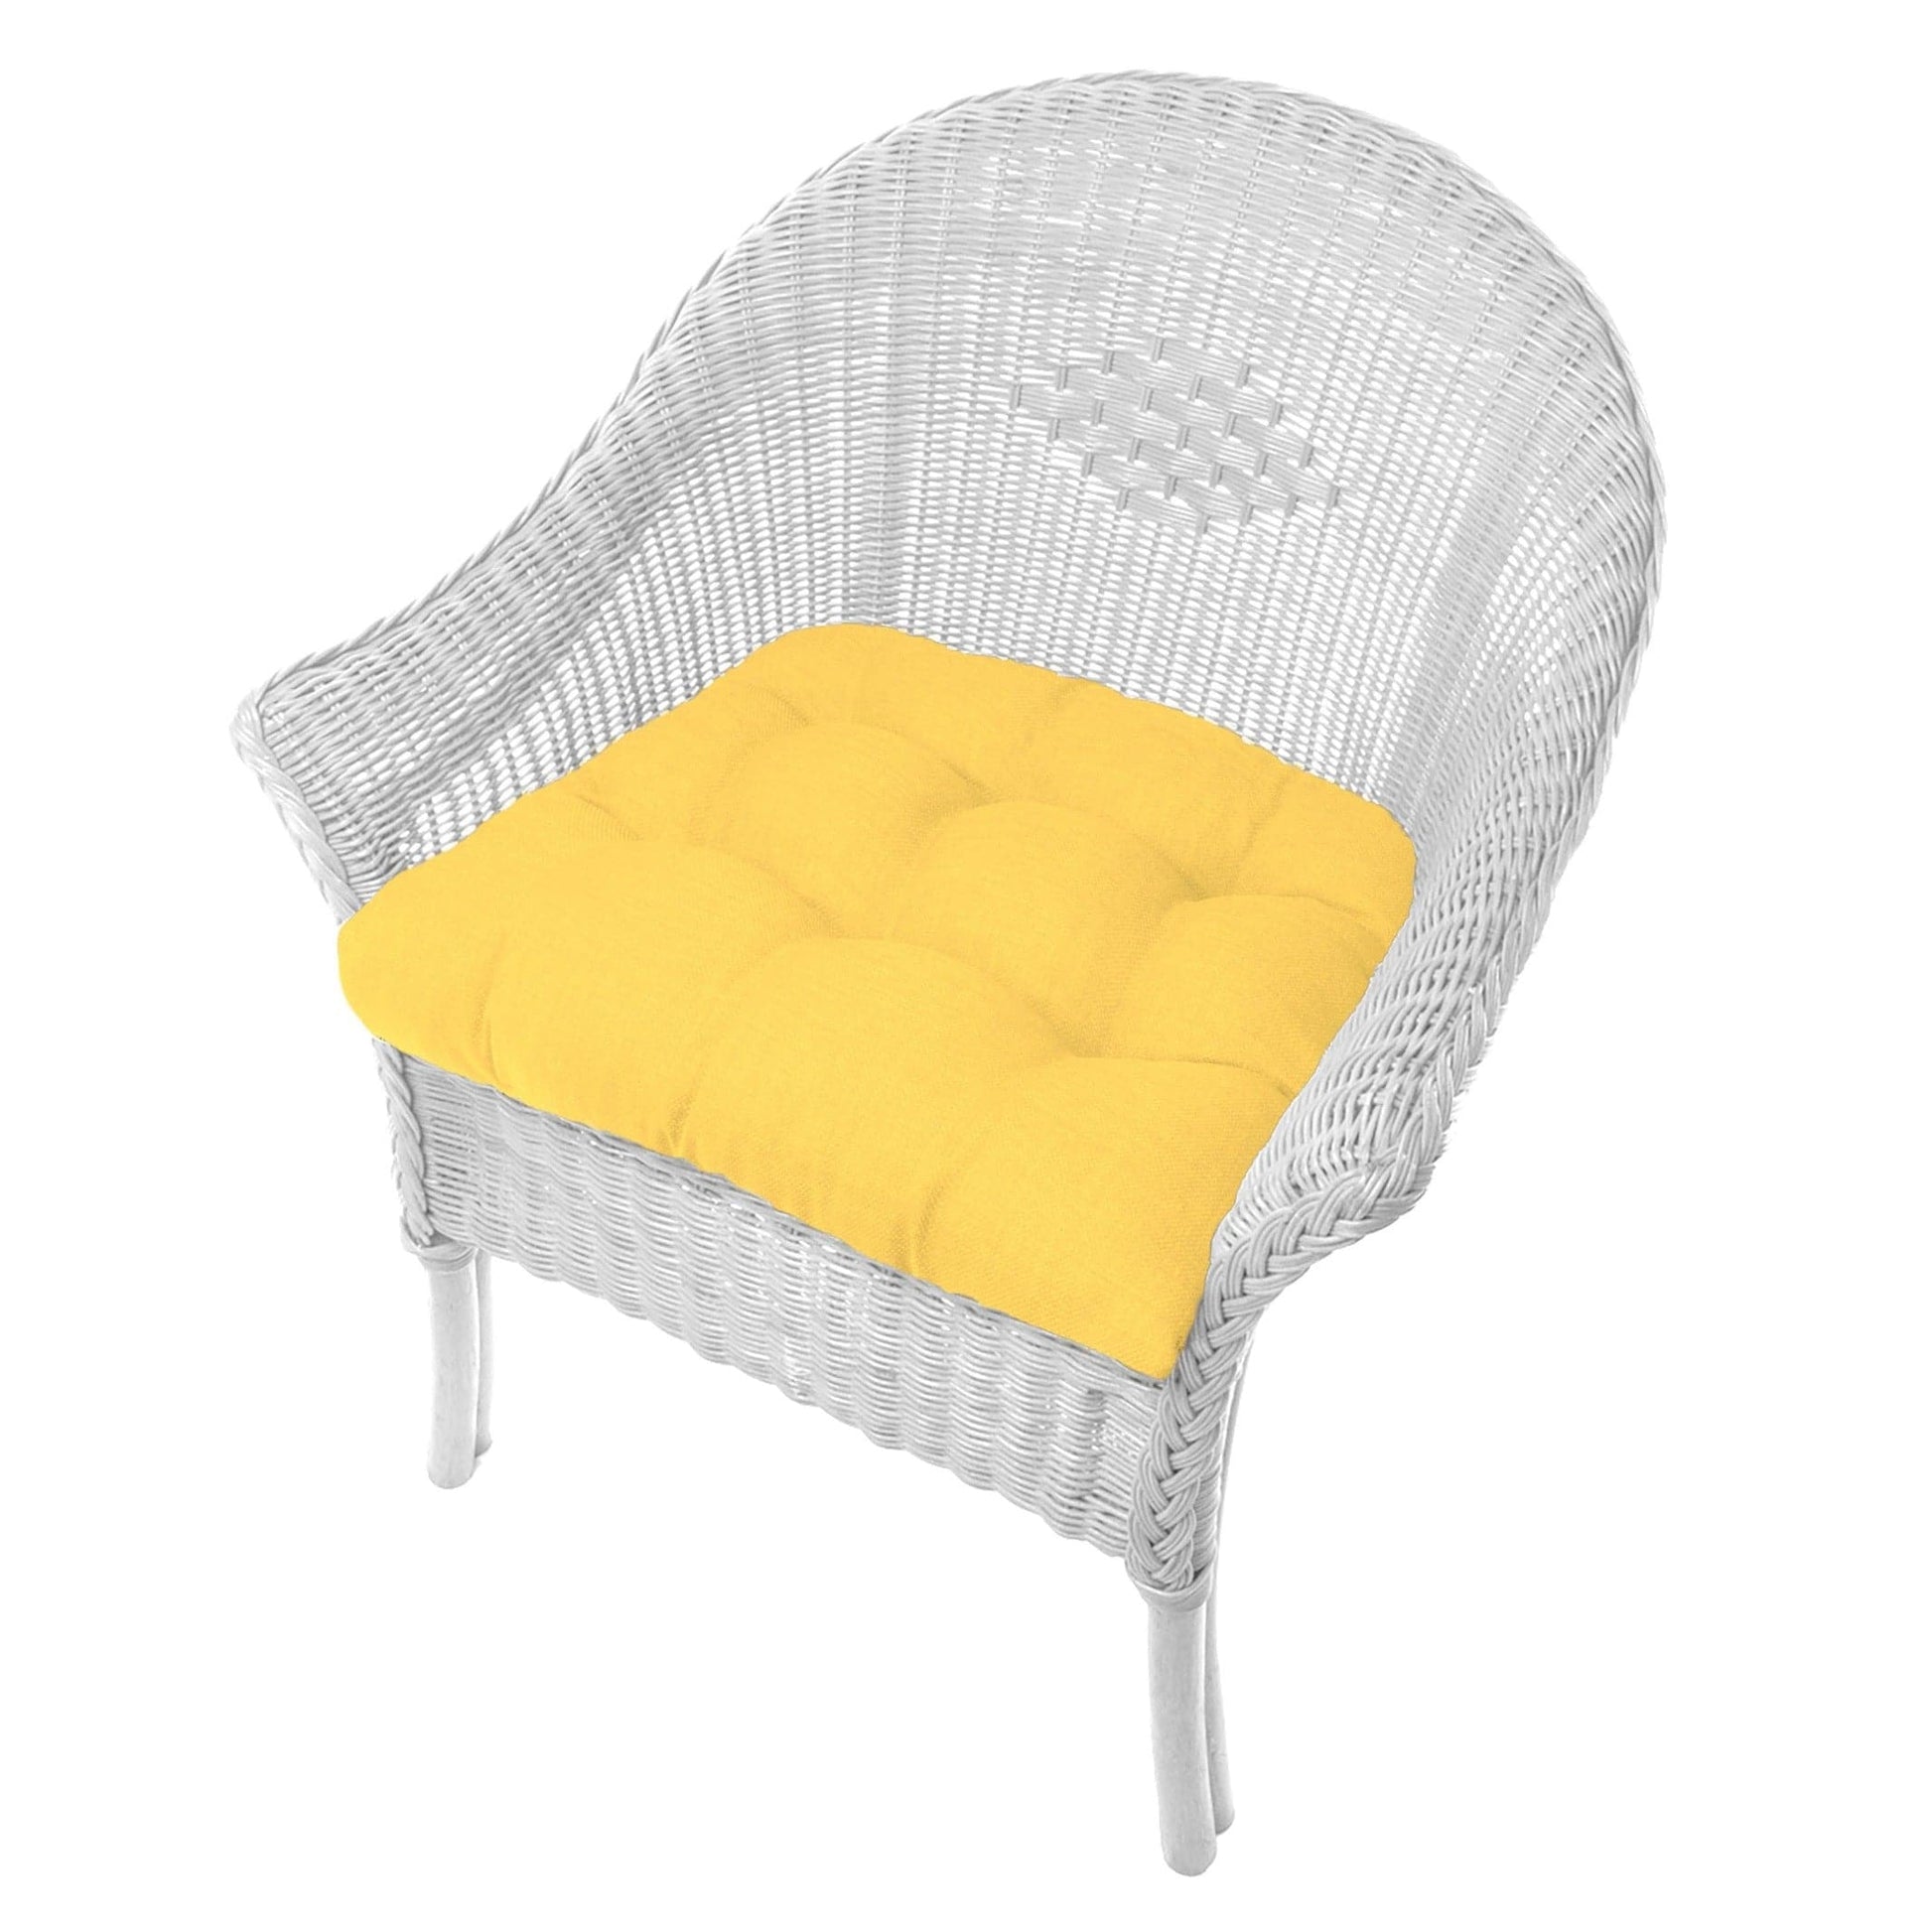 Rave Yellow Gold Patio Chair Cushions - Wicker Chair Cushions - Adirondack Chair Cushions